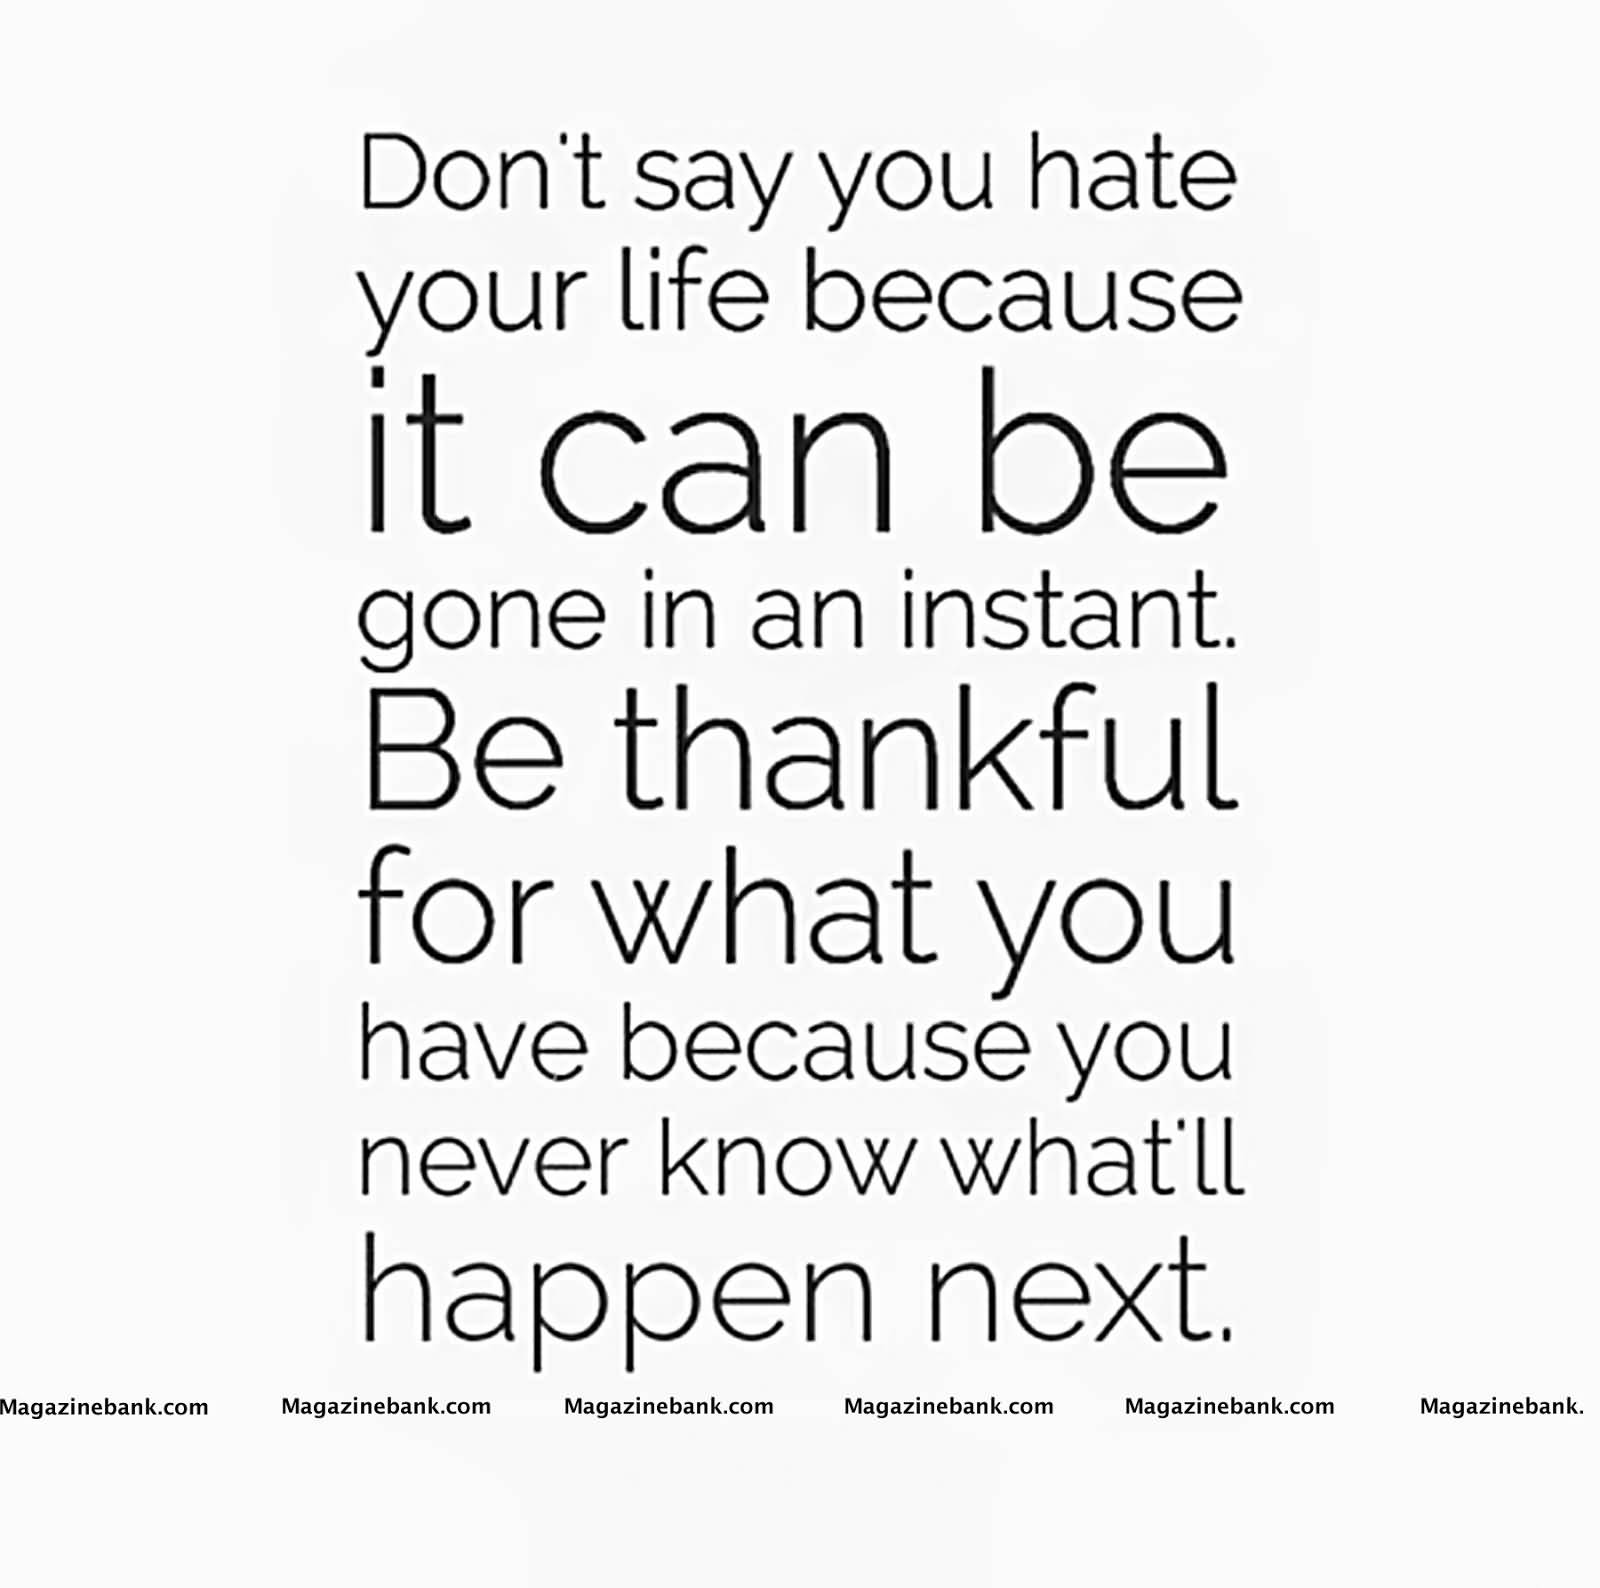 Don't say you hate your life because it can be gone in an instant. Be thankful for what you have because you never know what'll happen next.